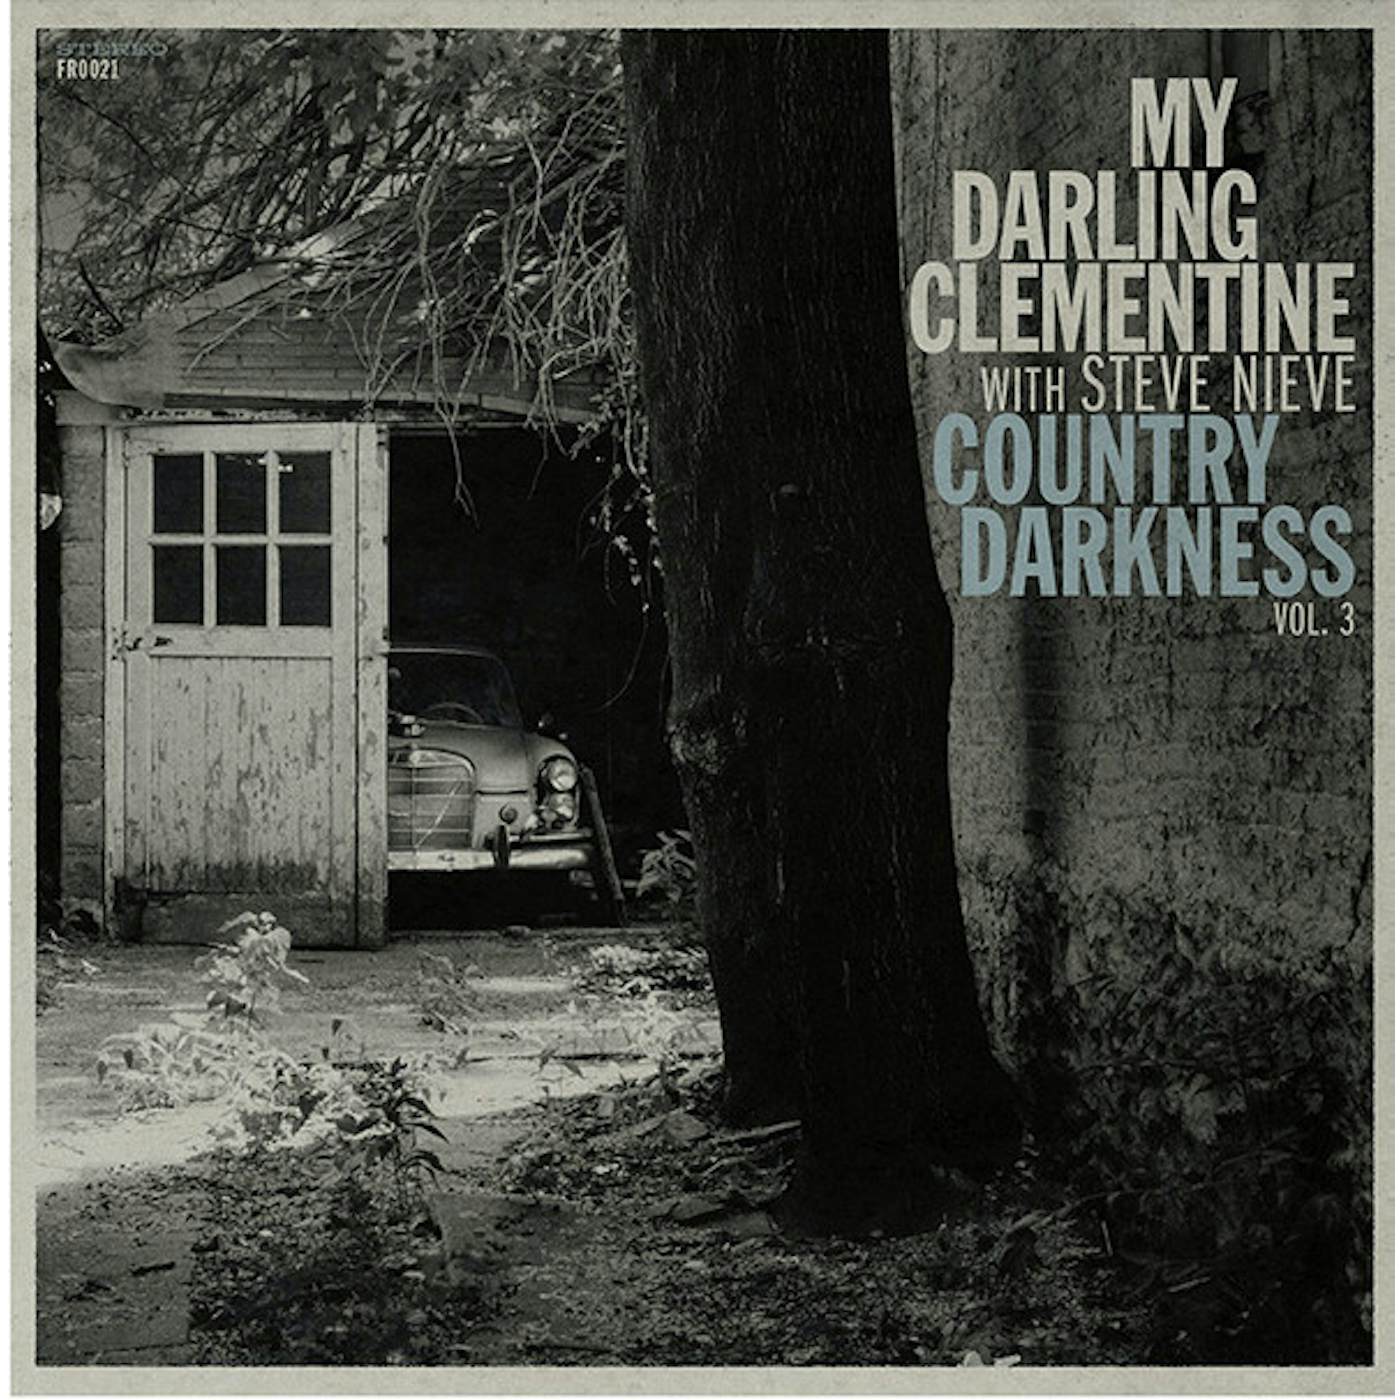 My Darling Clementine COUNTRY DARKNESS VOL 3 Vinyl Record